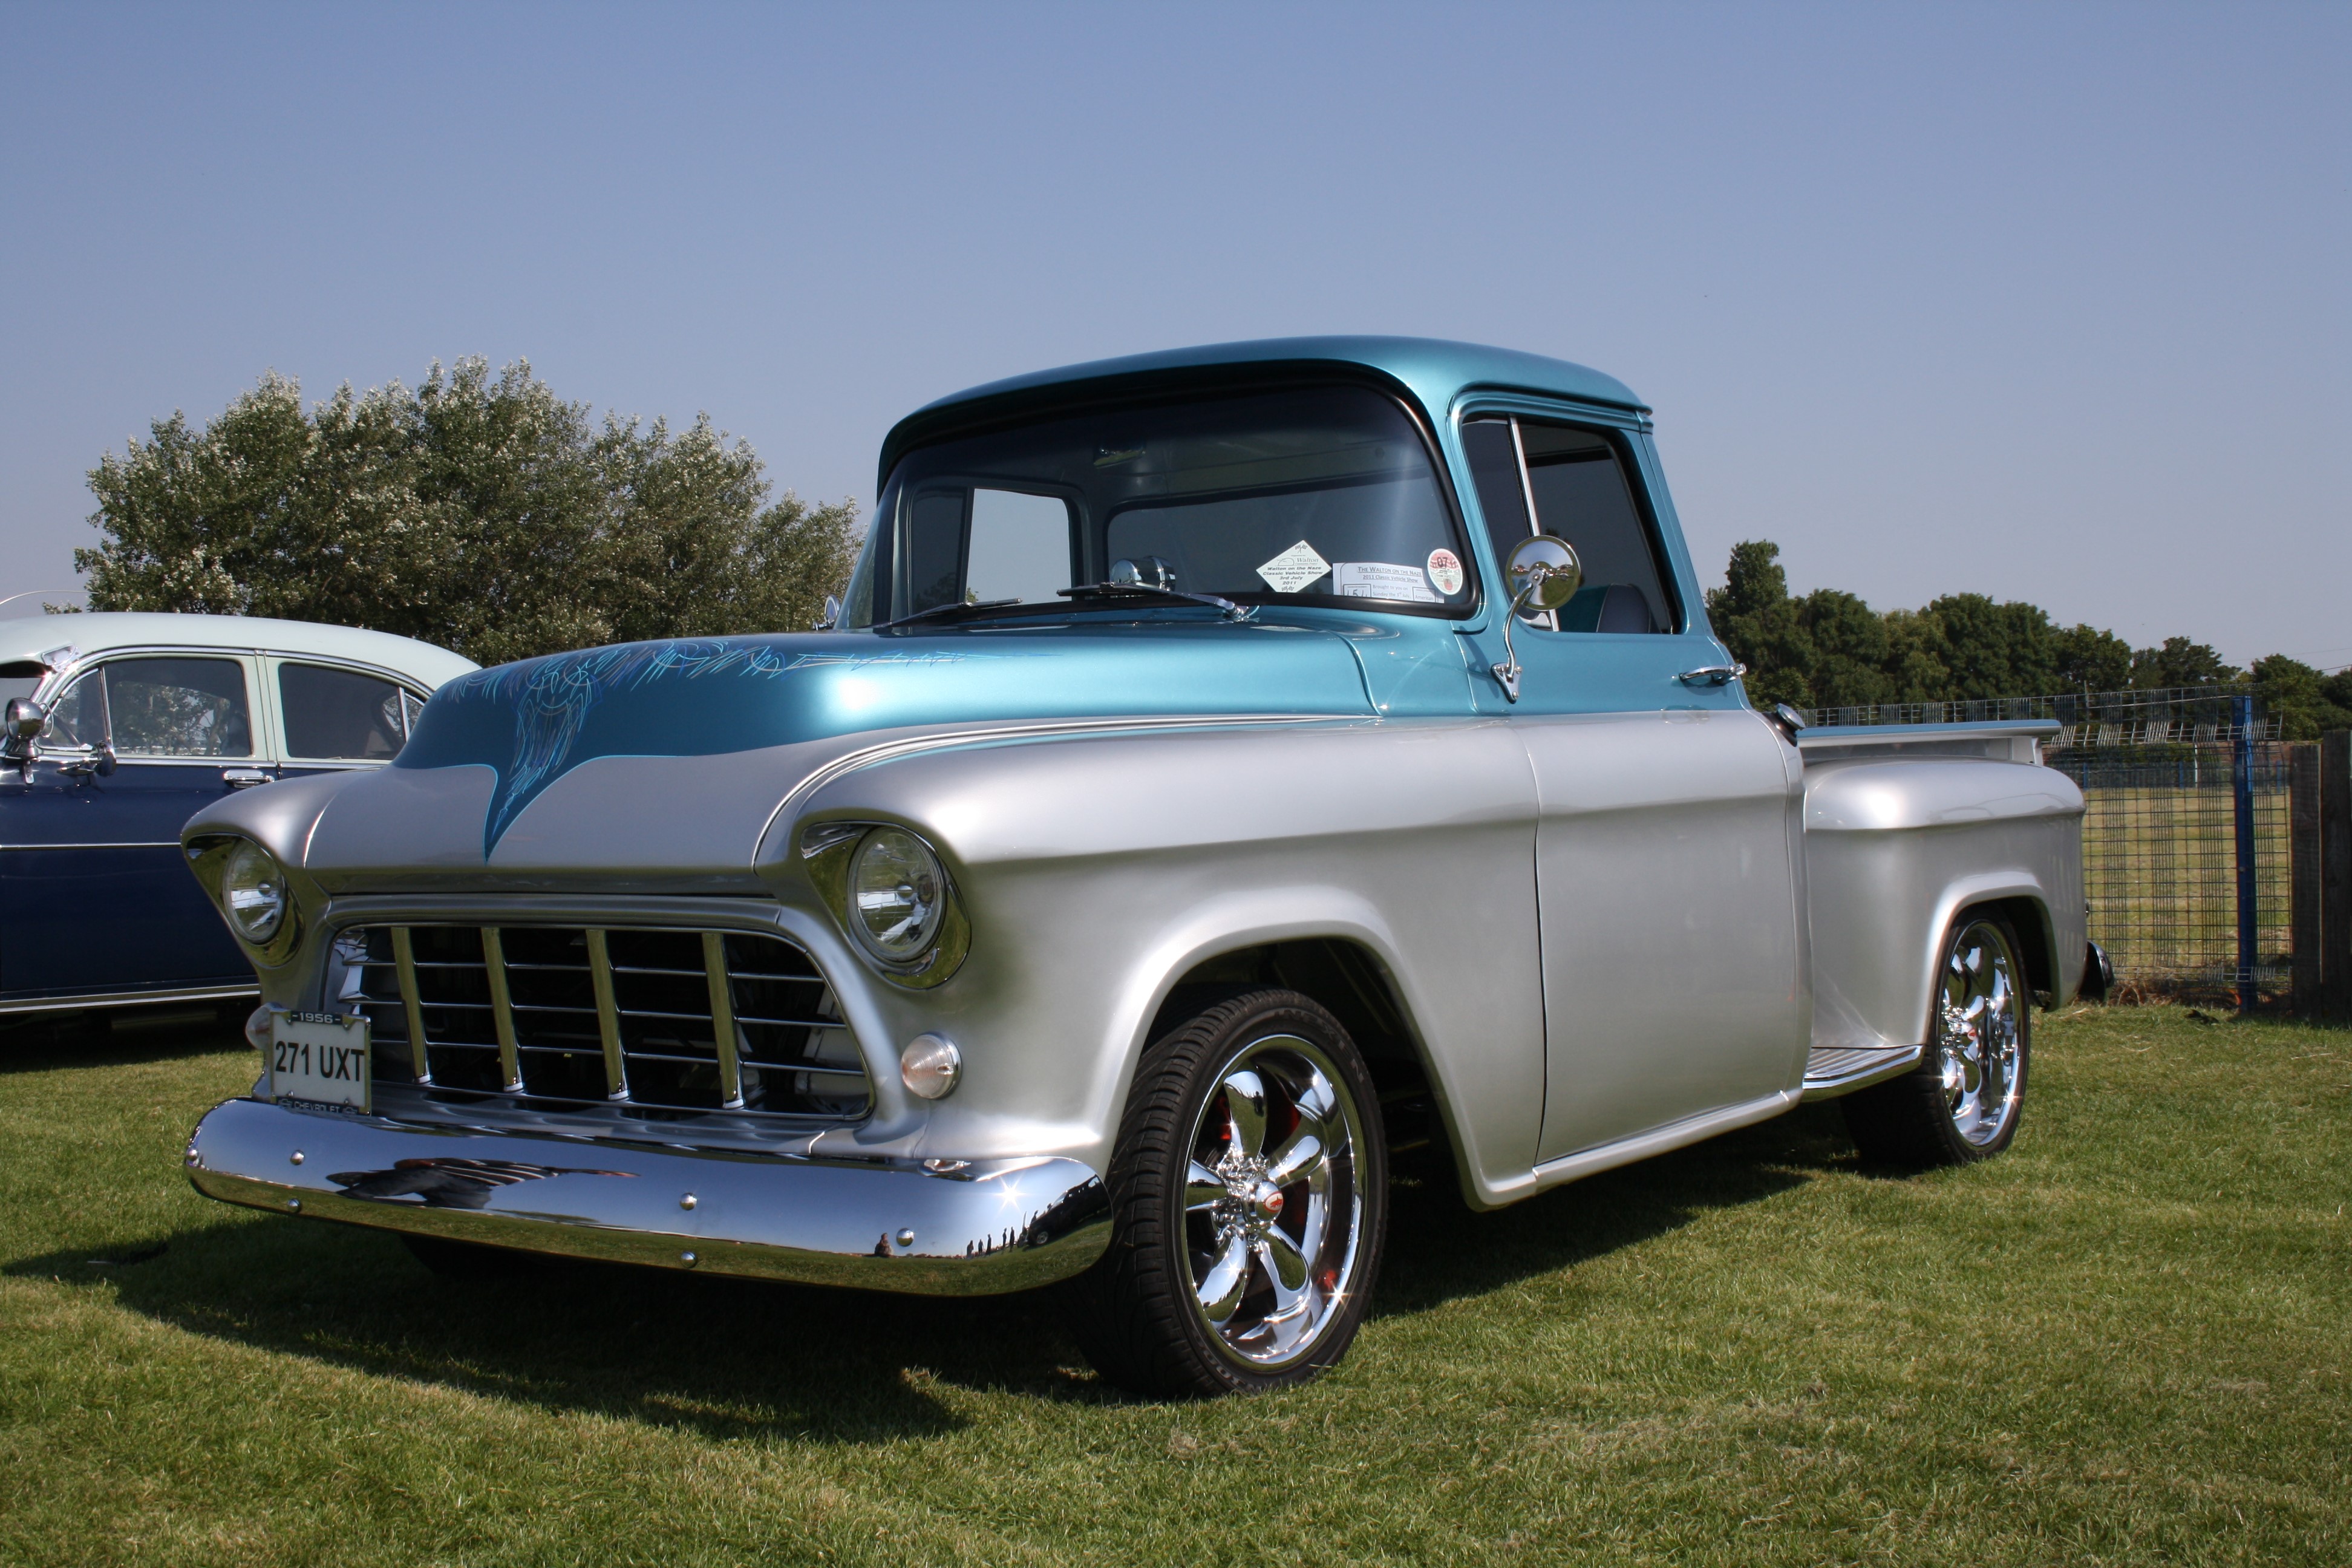 Classic truck for an article listing fun Shorewood events.